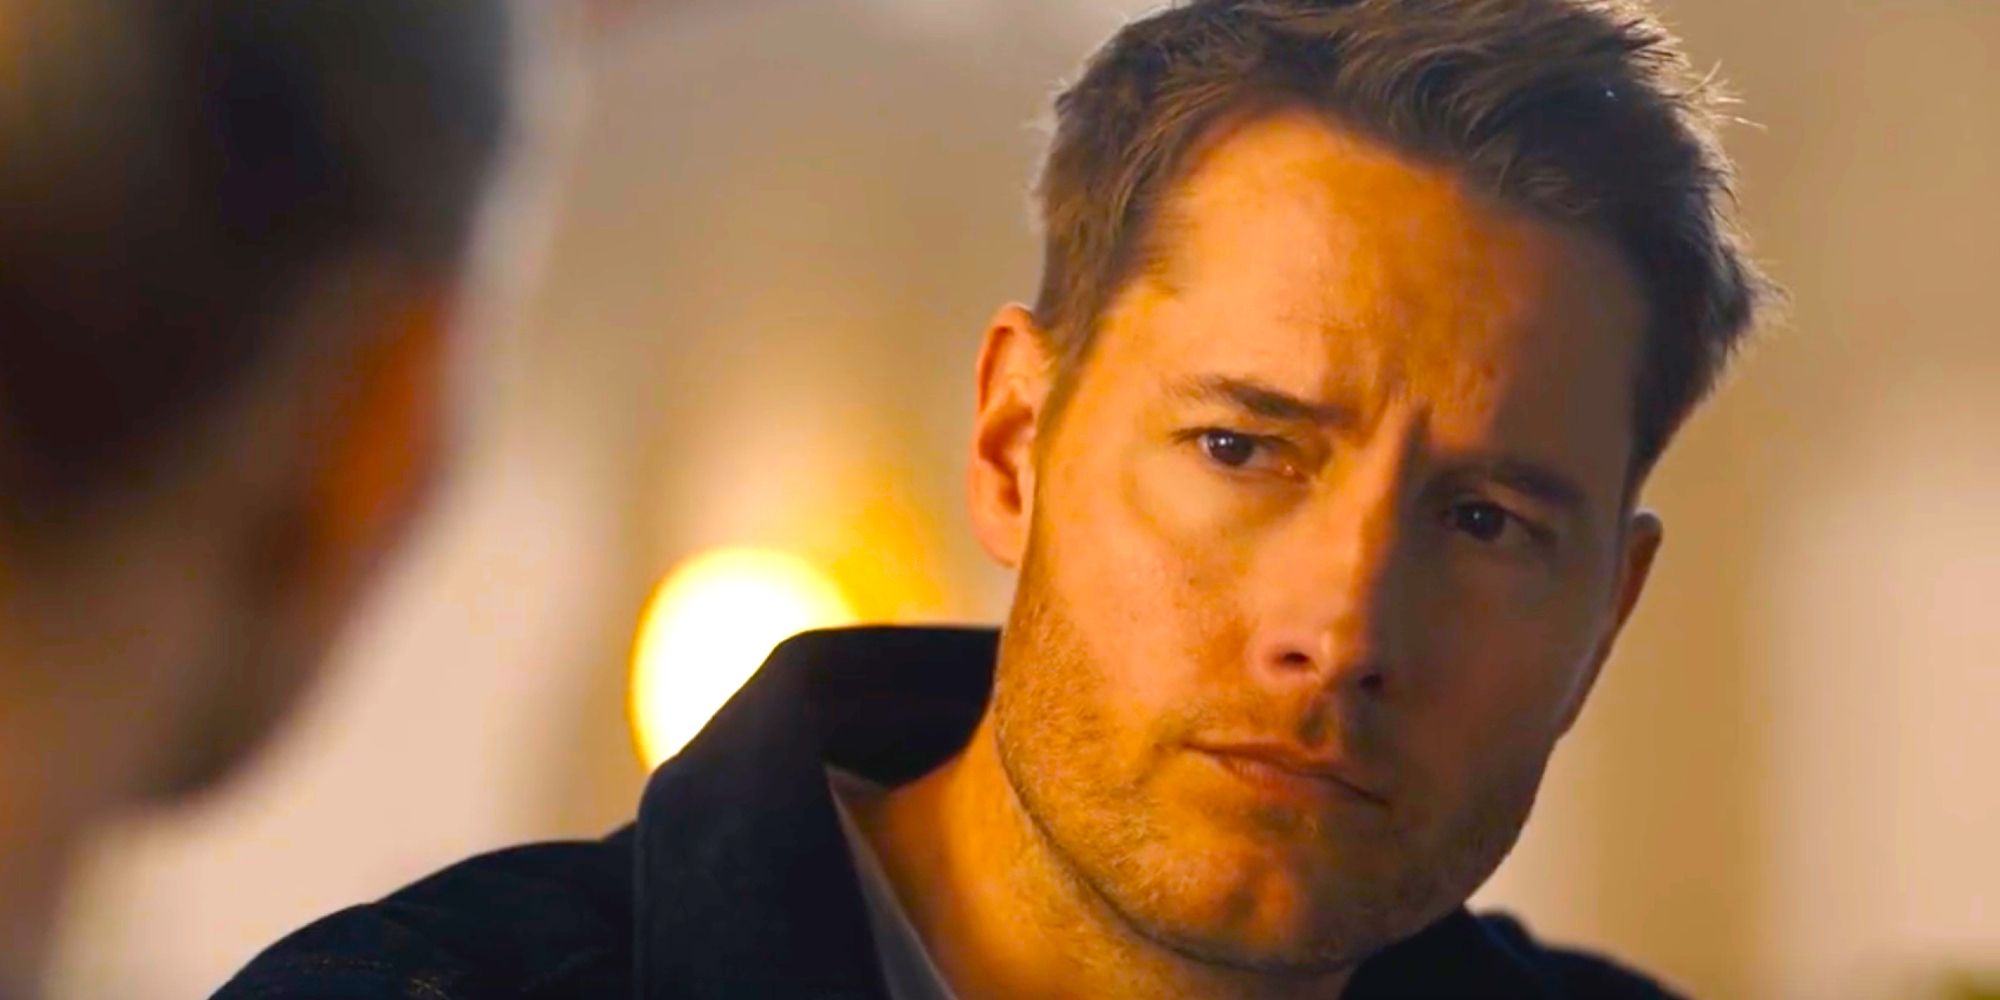 Justin Hartley as Colter Shaw looking concerned in Tracker season 1 episode 13